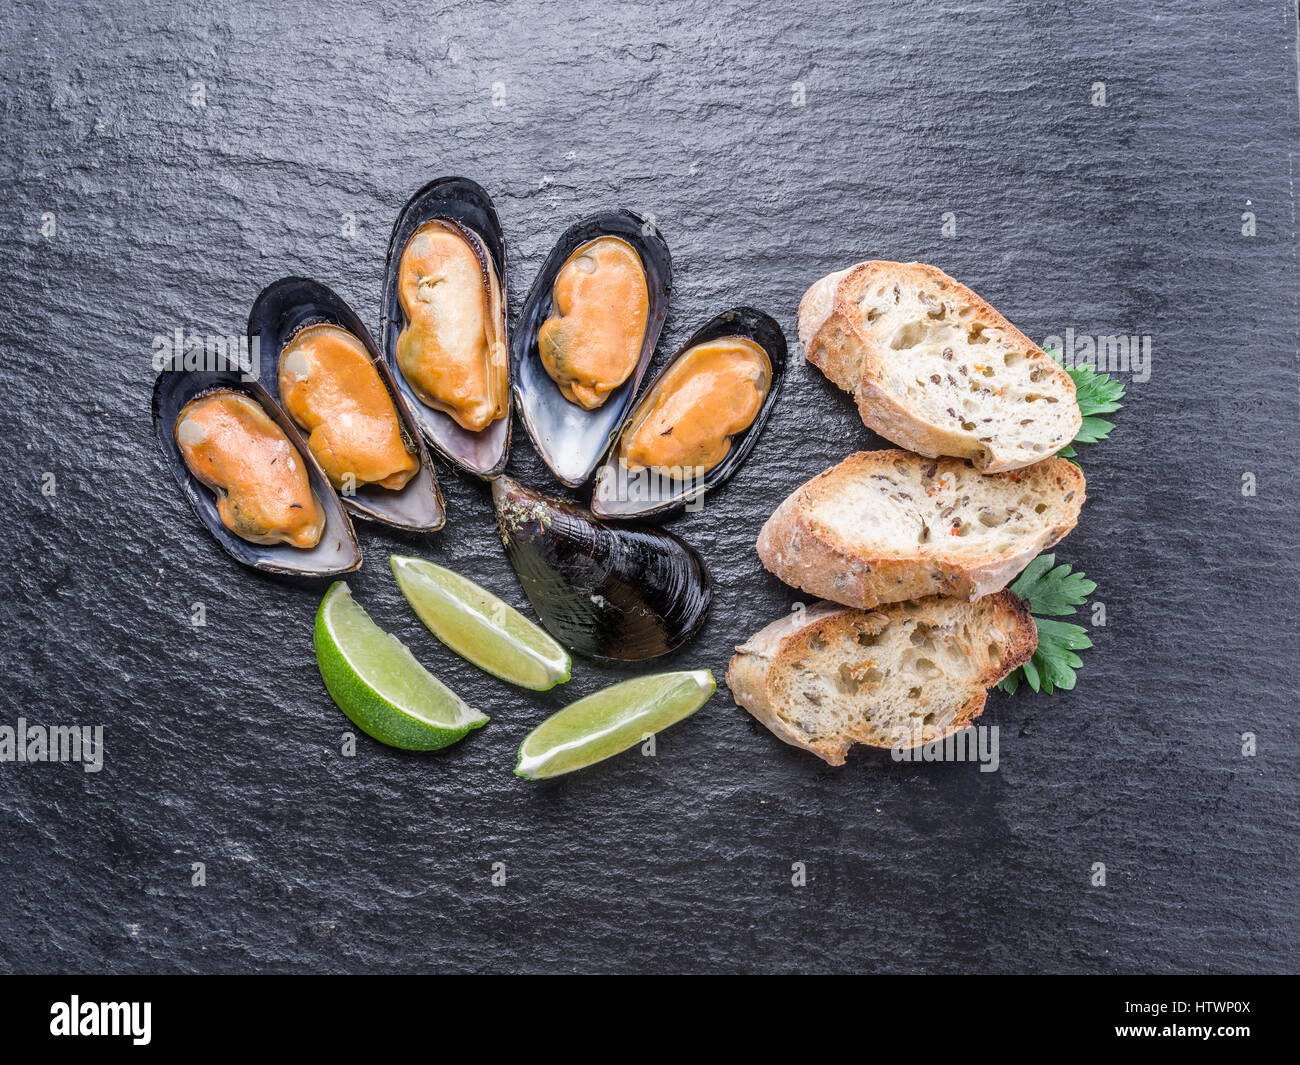 Boiled mussels on the graphite background. Stock Photo